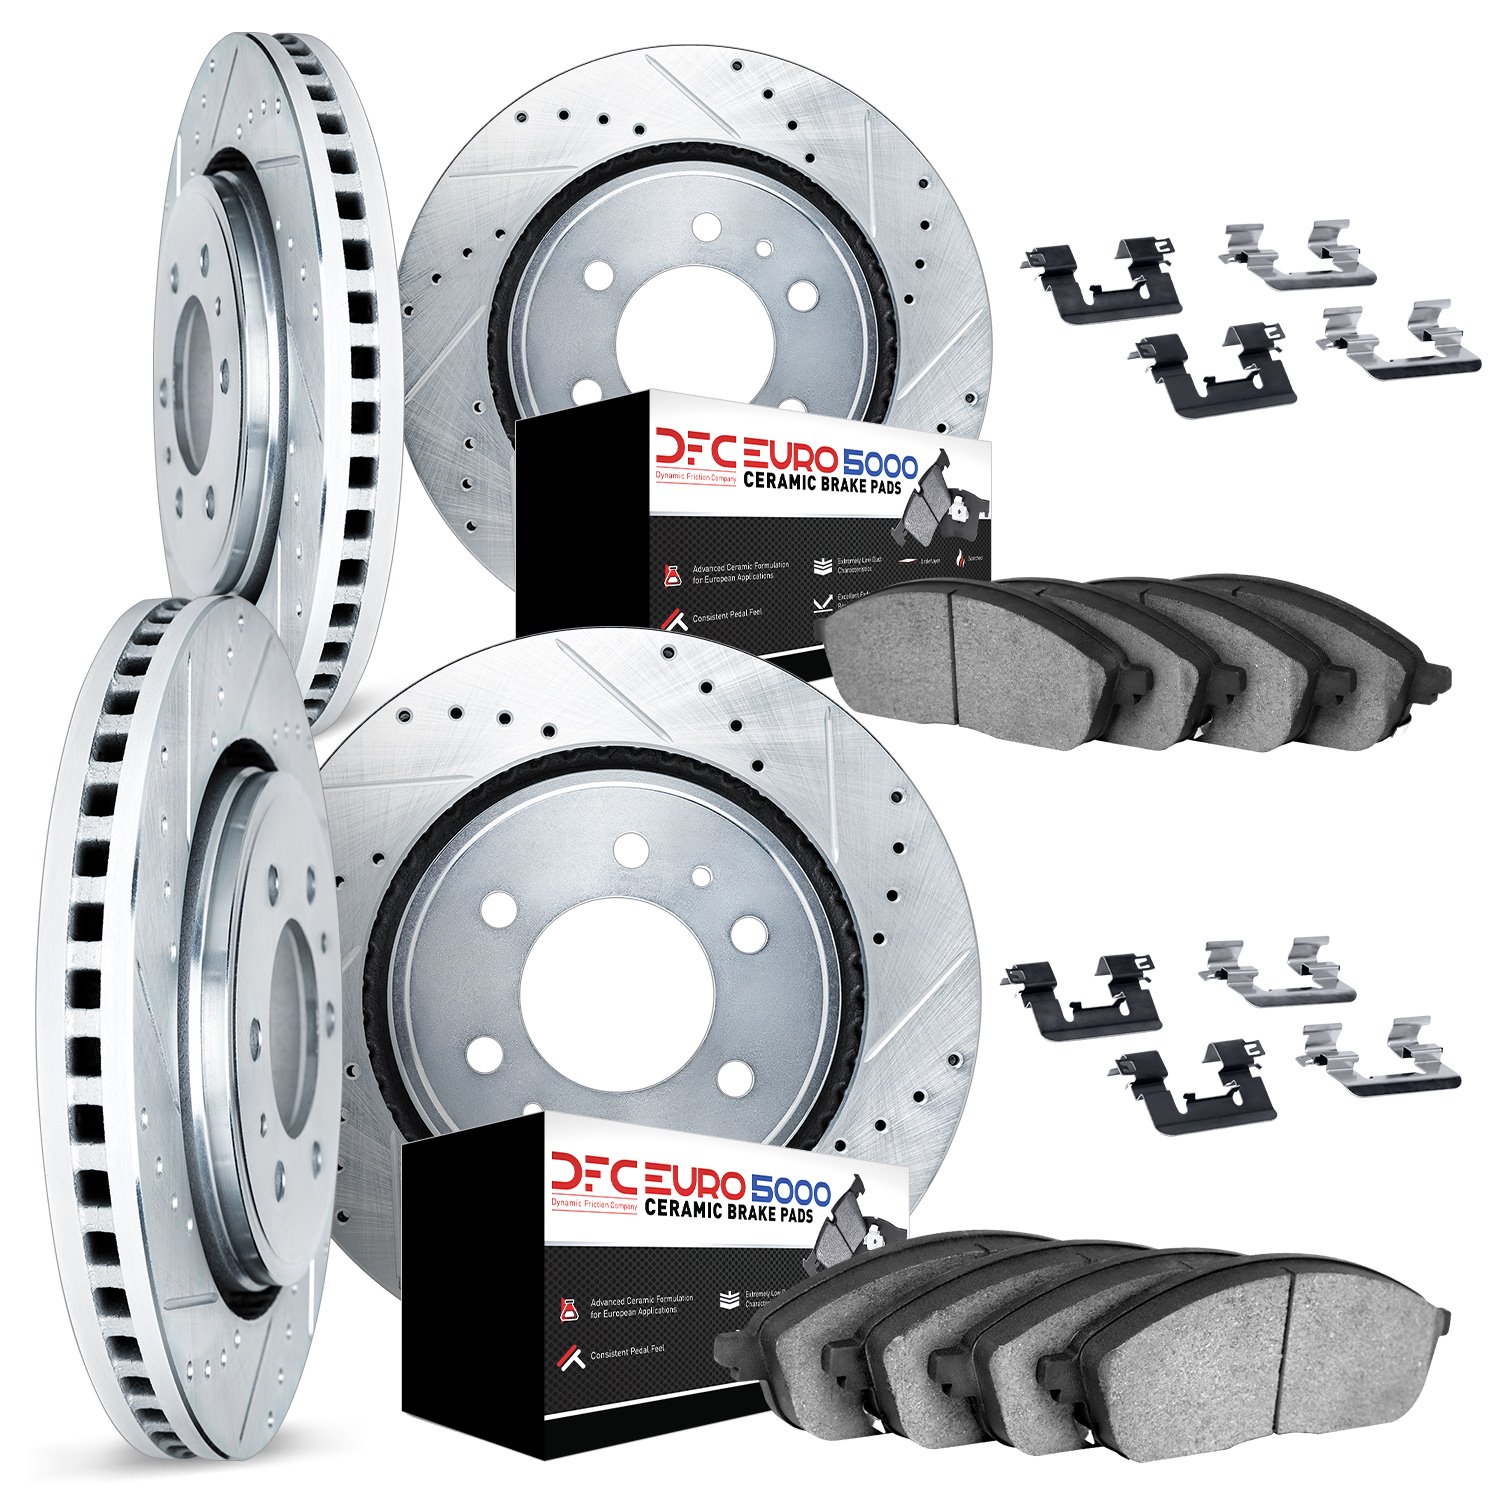 7614-48003 Drilled/Slotted Brake Rotors w/5000 Euro Ceramic Brake Pads Kit & Hardware [Silver], 2006-2009 GM, Position: Front an